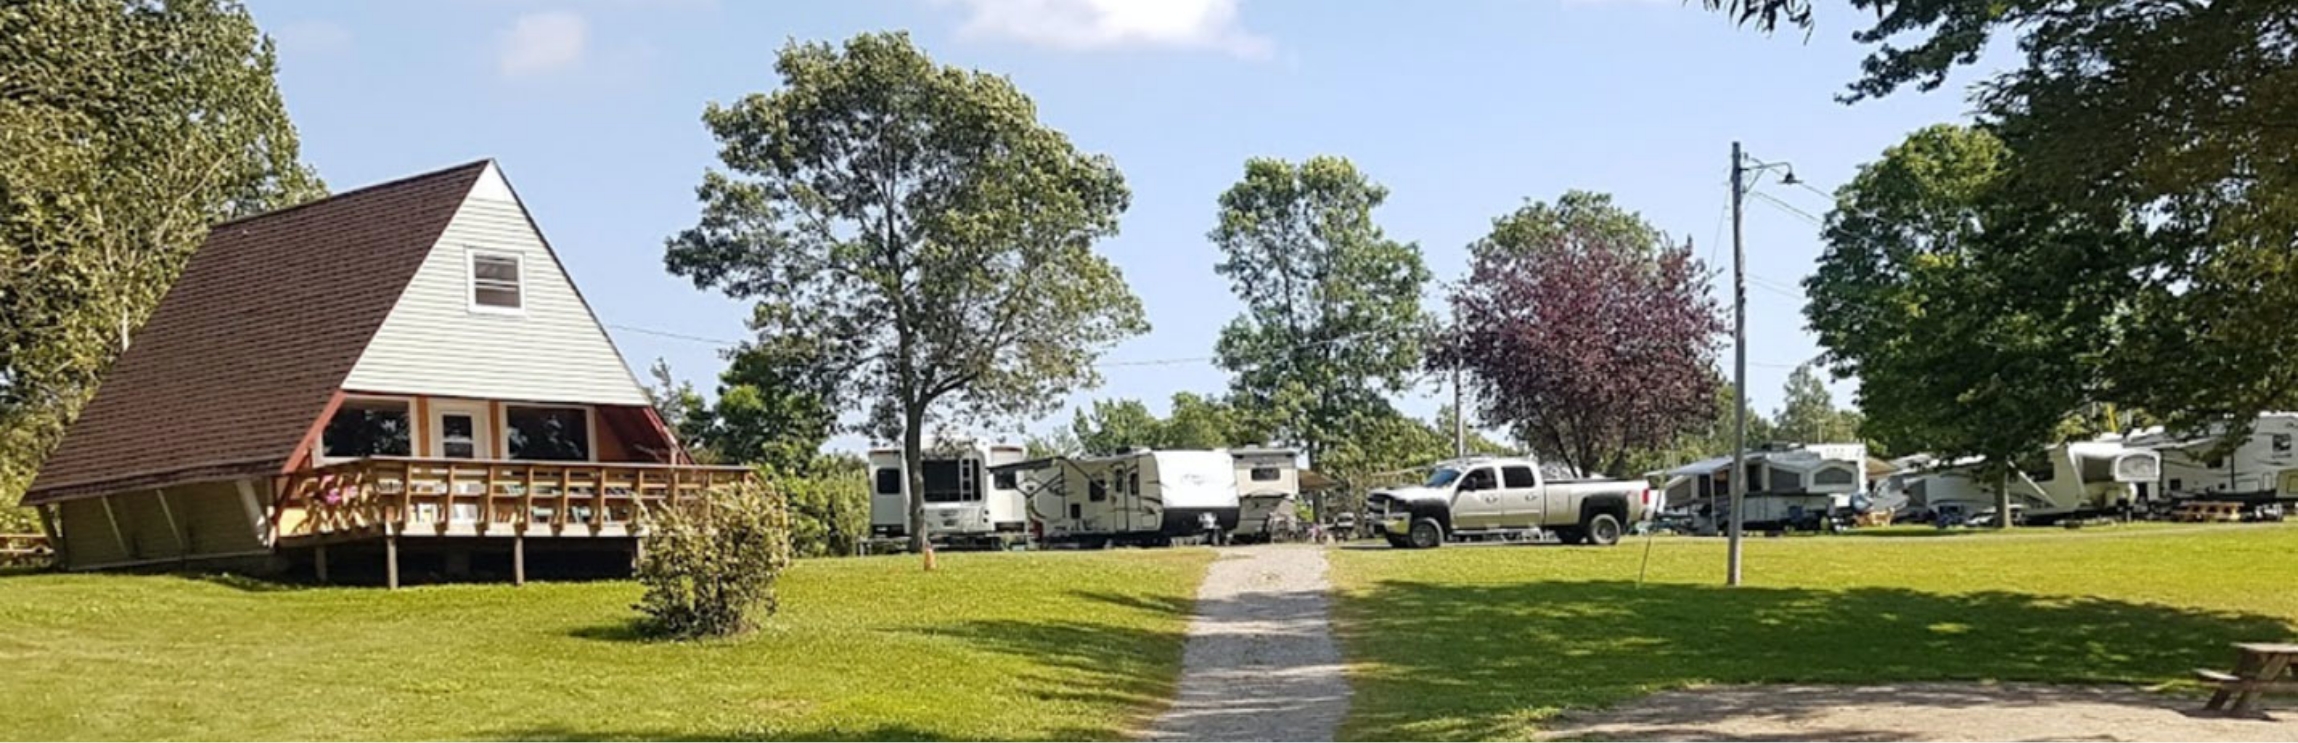 View of Cottage rental and parked RVs